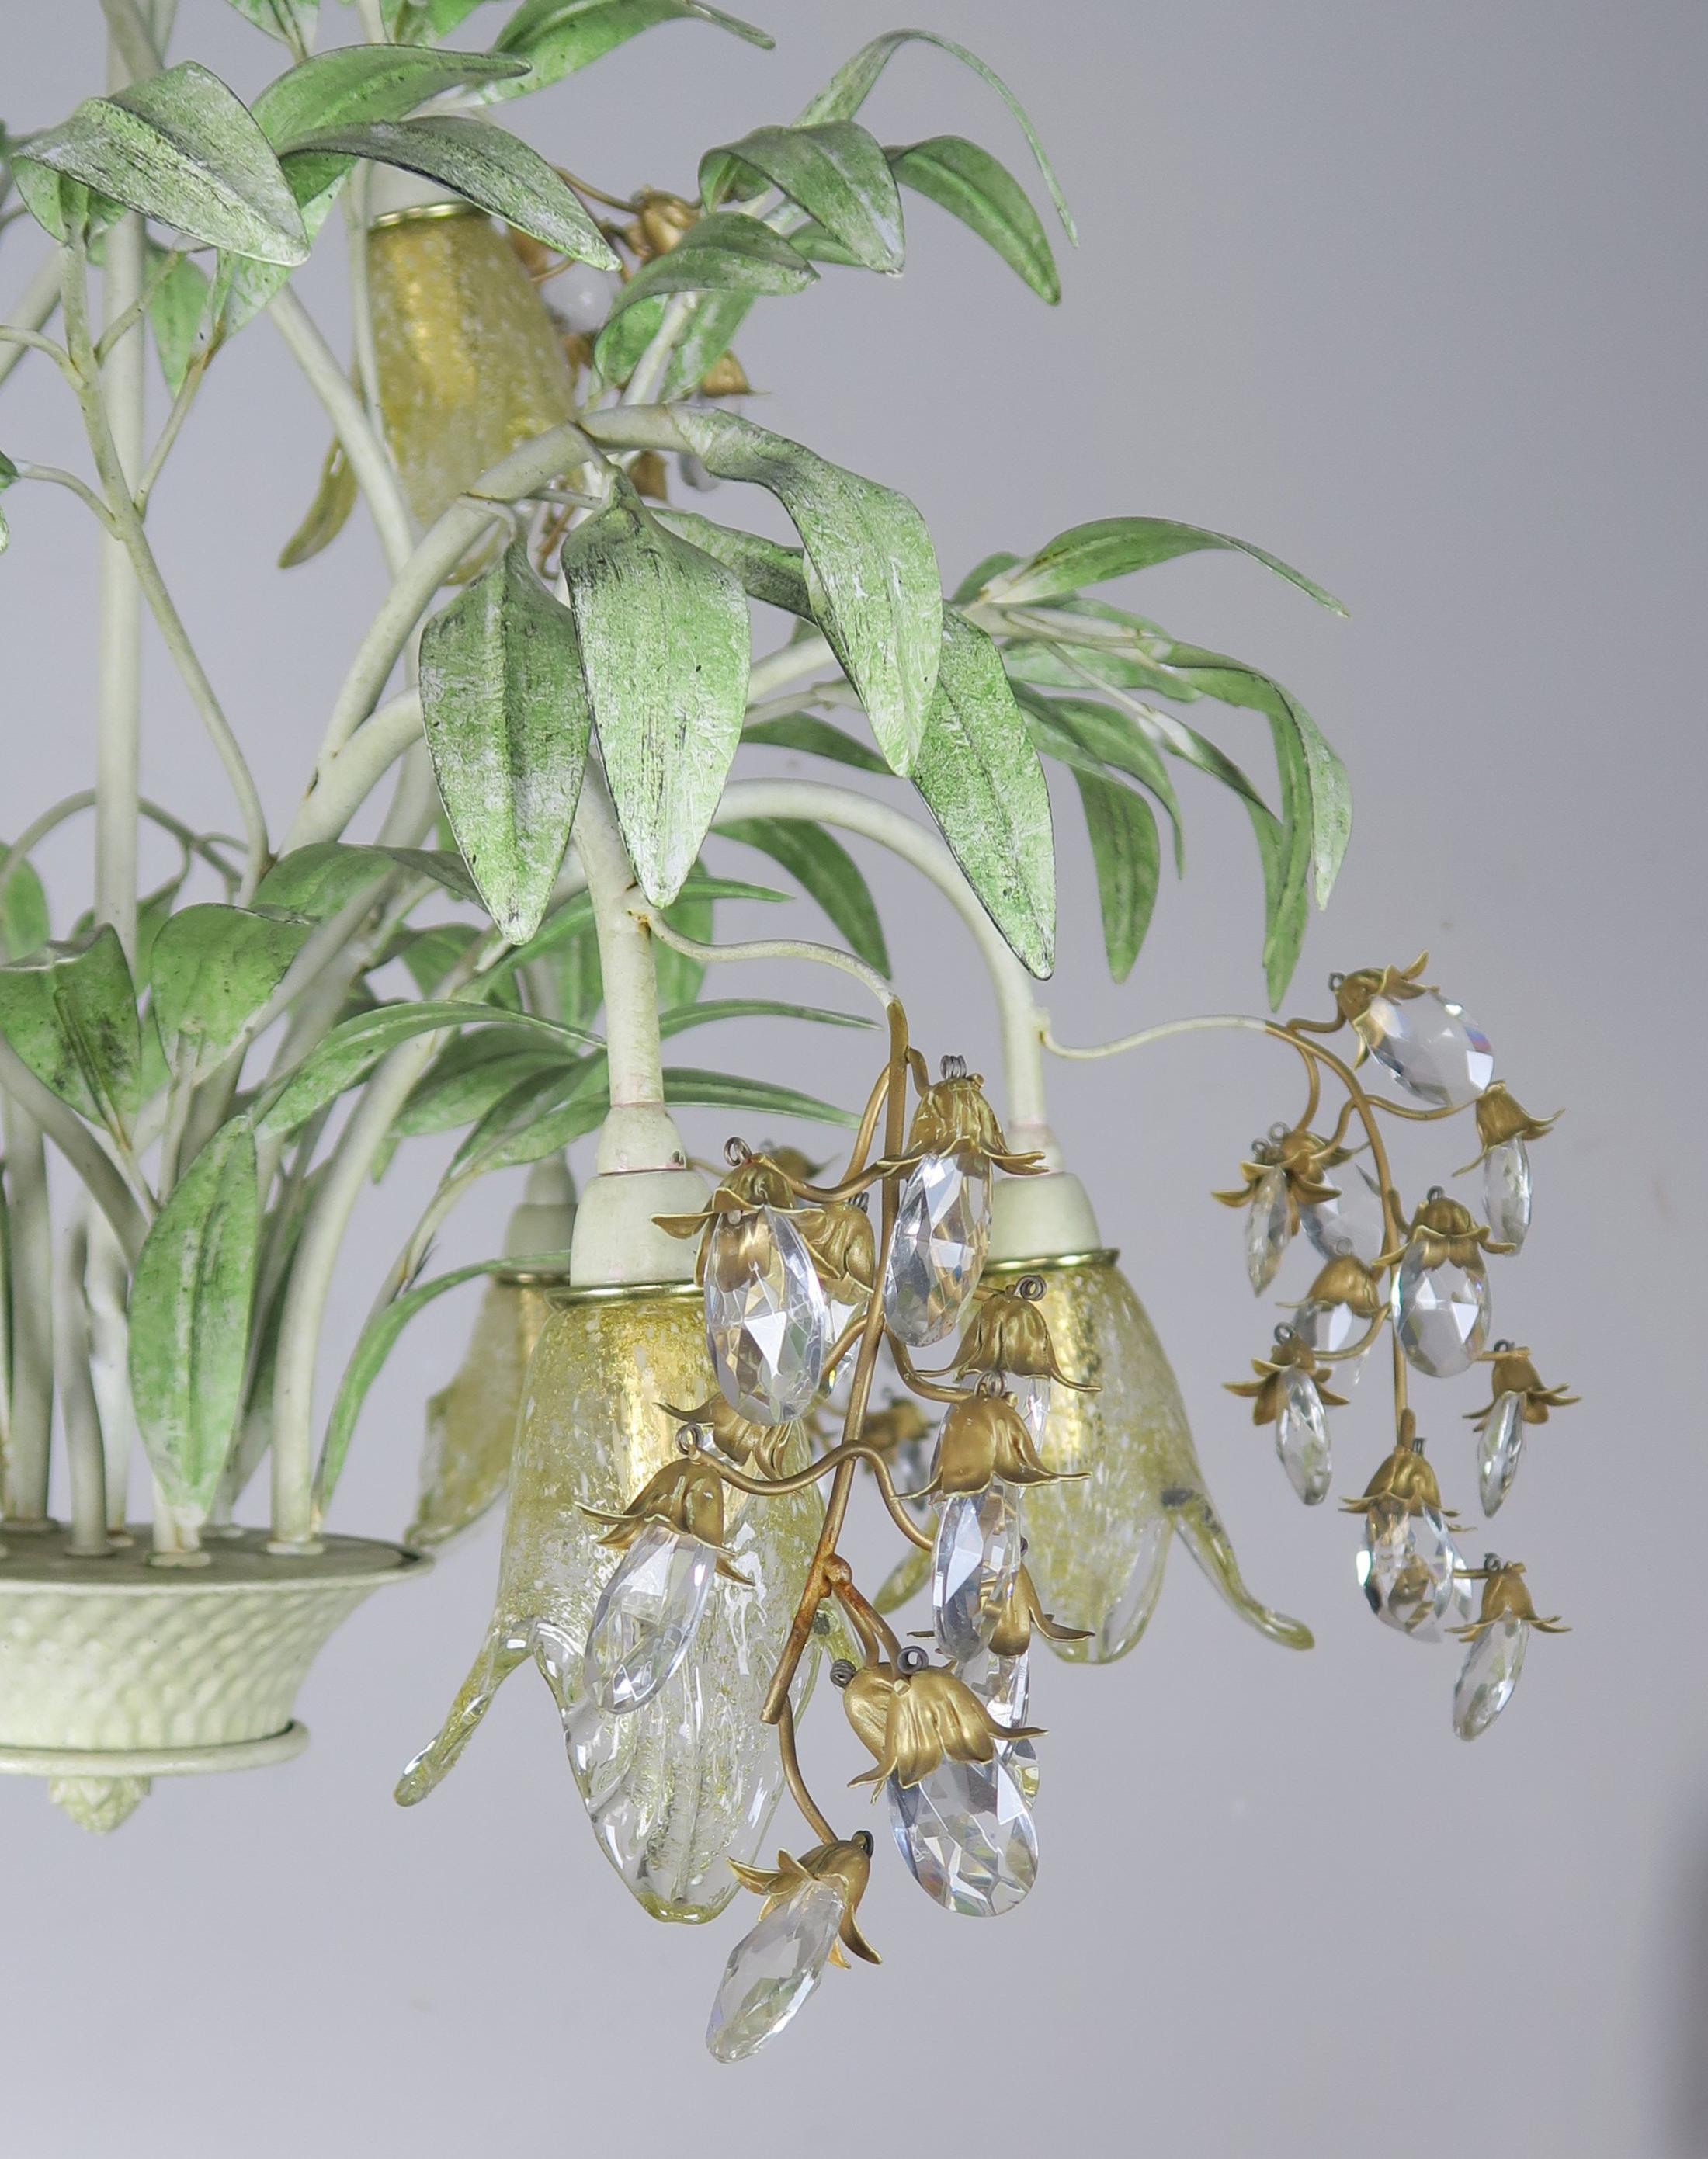 Unique Italian hand painted tole basket chandelier with hand blown Murano glass flowers and almond shaped crystals that add just enough sparkle to this whimsical piece. Eight-light fixture with eight hand blown tulip shaped golden colored flowers